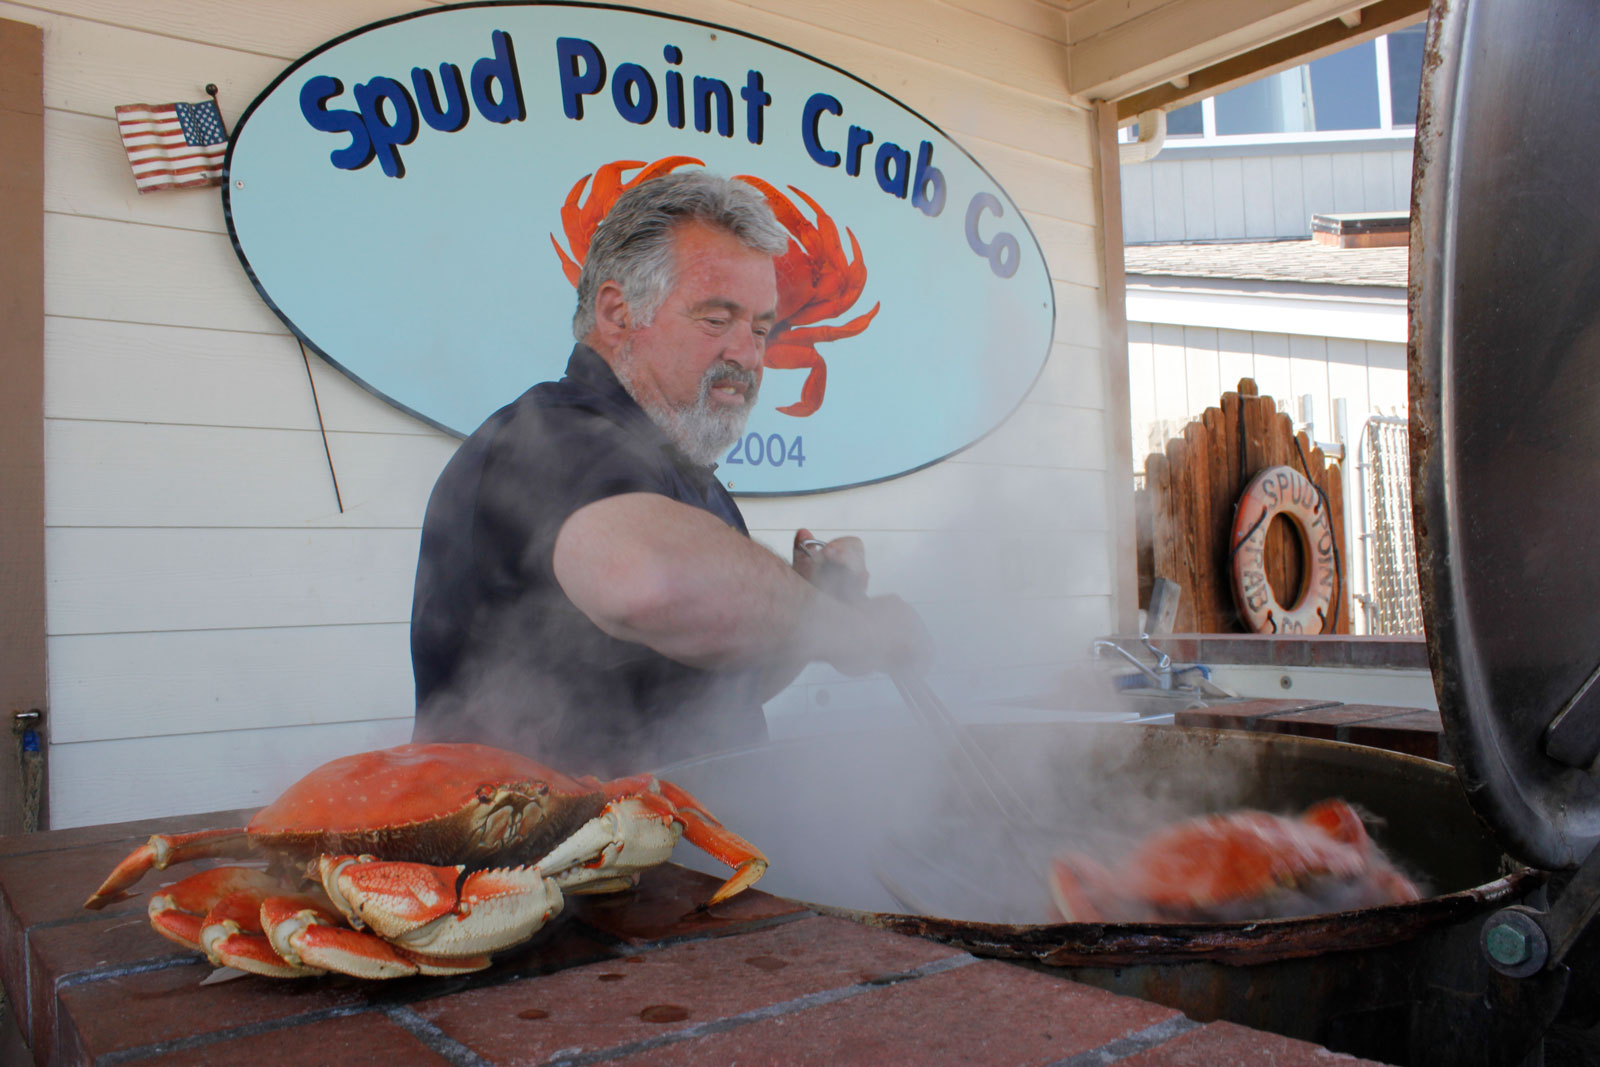 A man cooks crab on a BBQ in front of a blue sign 